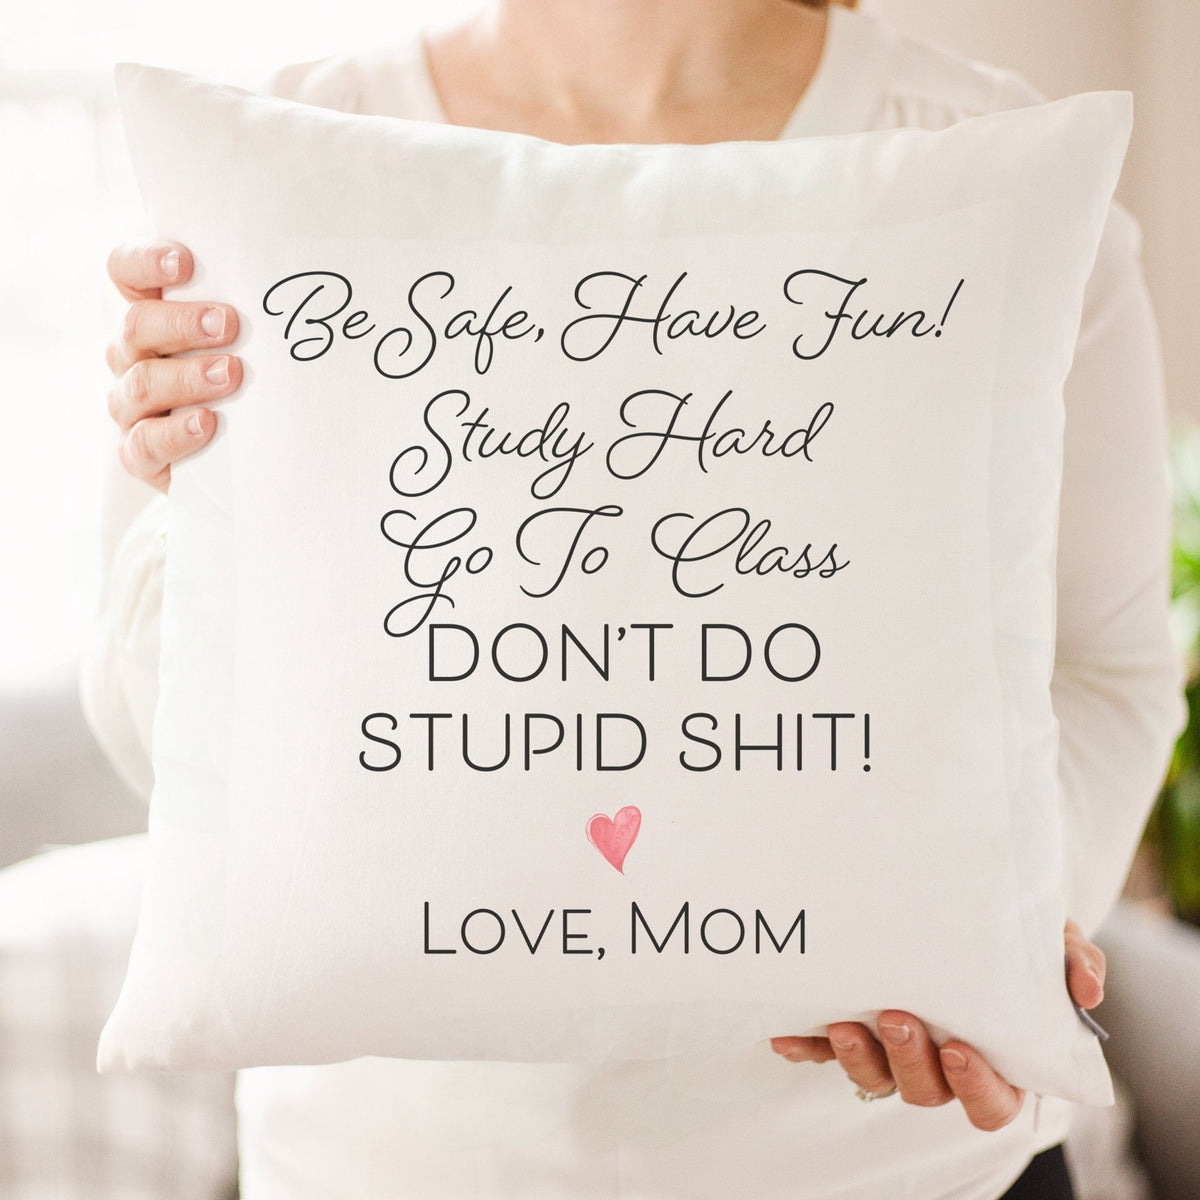 http://sweethooligans.design/cdn/shop/products/be-safe-have-fun-dont-do-stupid-shit-dorm-pillow-dorm-decor-going-away-gift-gift-for-son-gift-for-daughter-college-dorm-gift-128693_1200x1200.jpg?v=1668882673